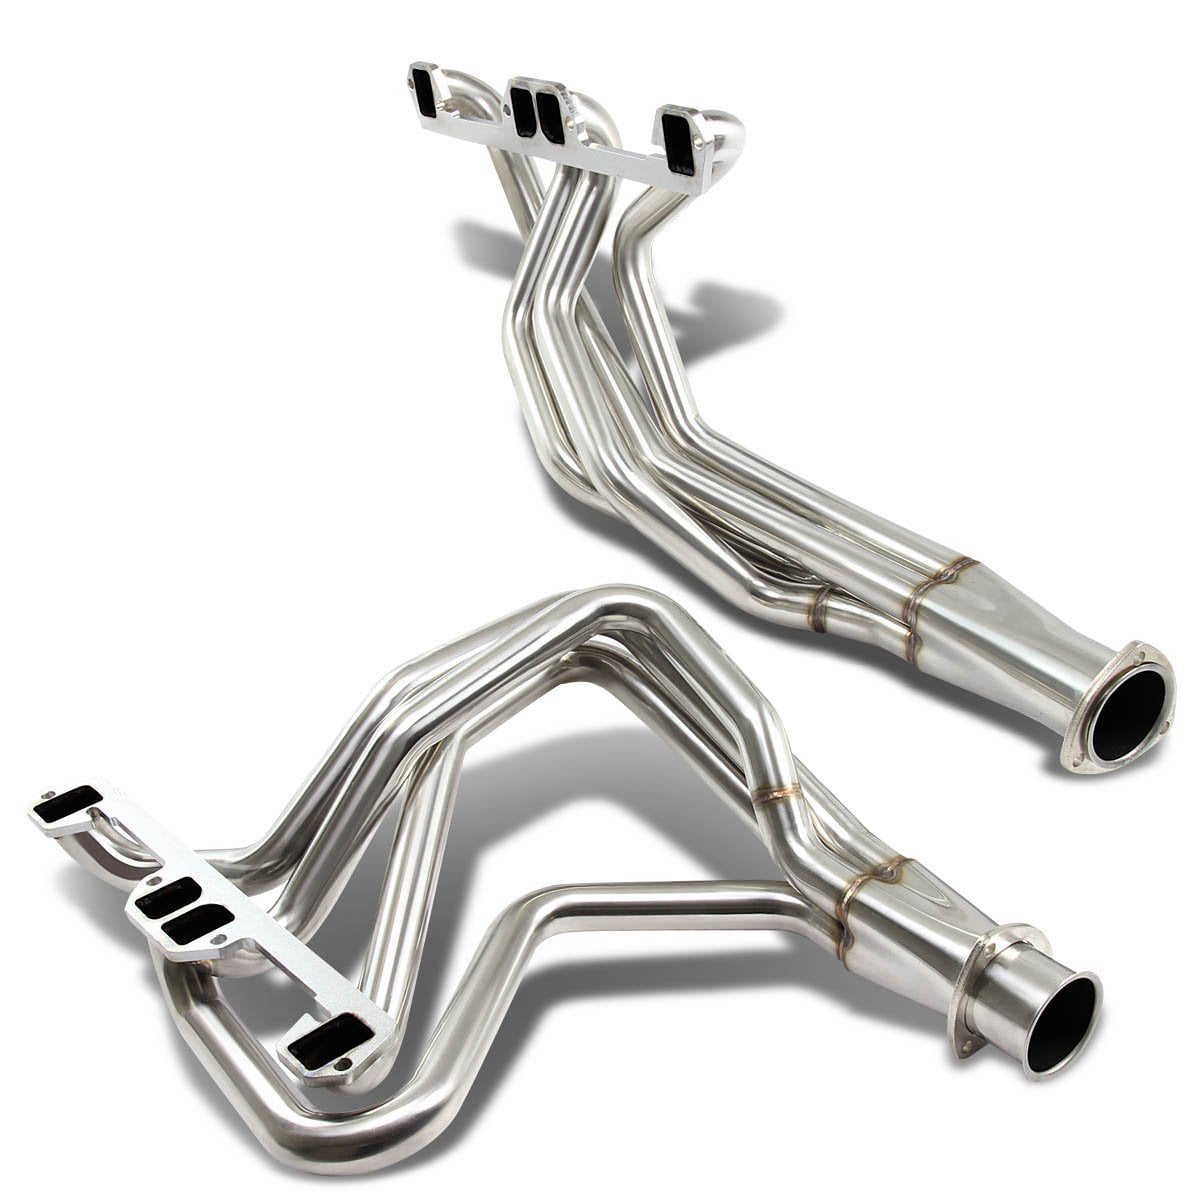 Exhaust Headers Fits Dodge Plymouth Small Block 273-360 5.2//5.6 For shorty